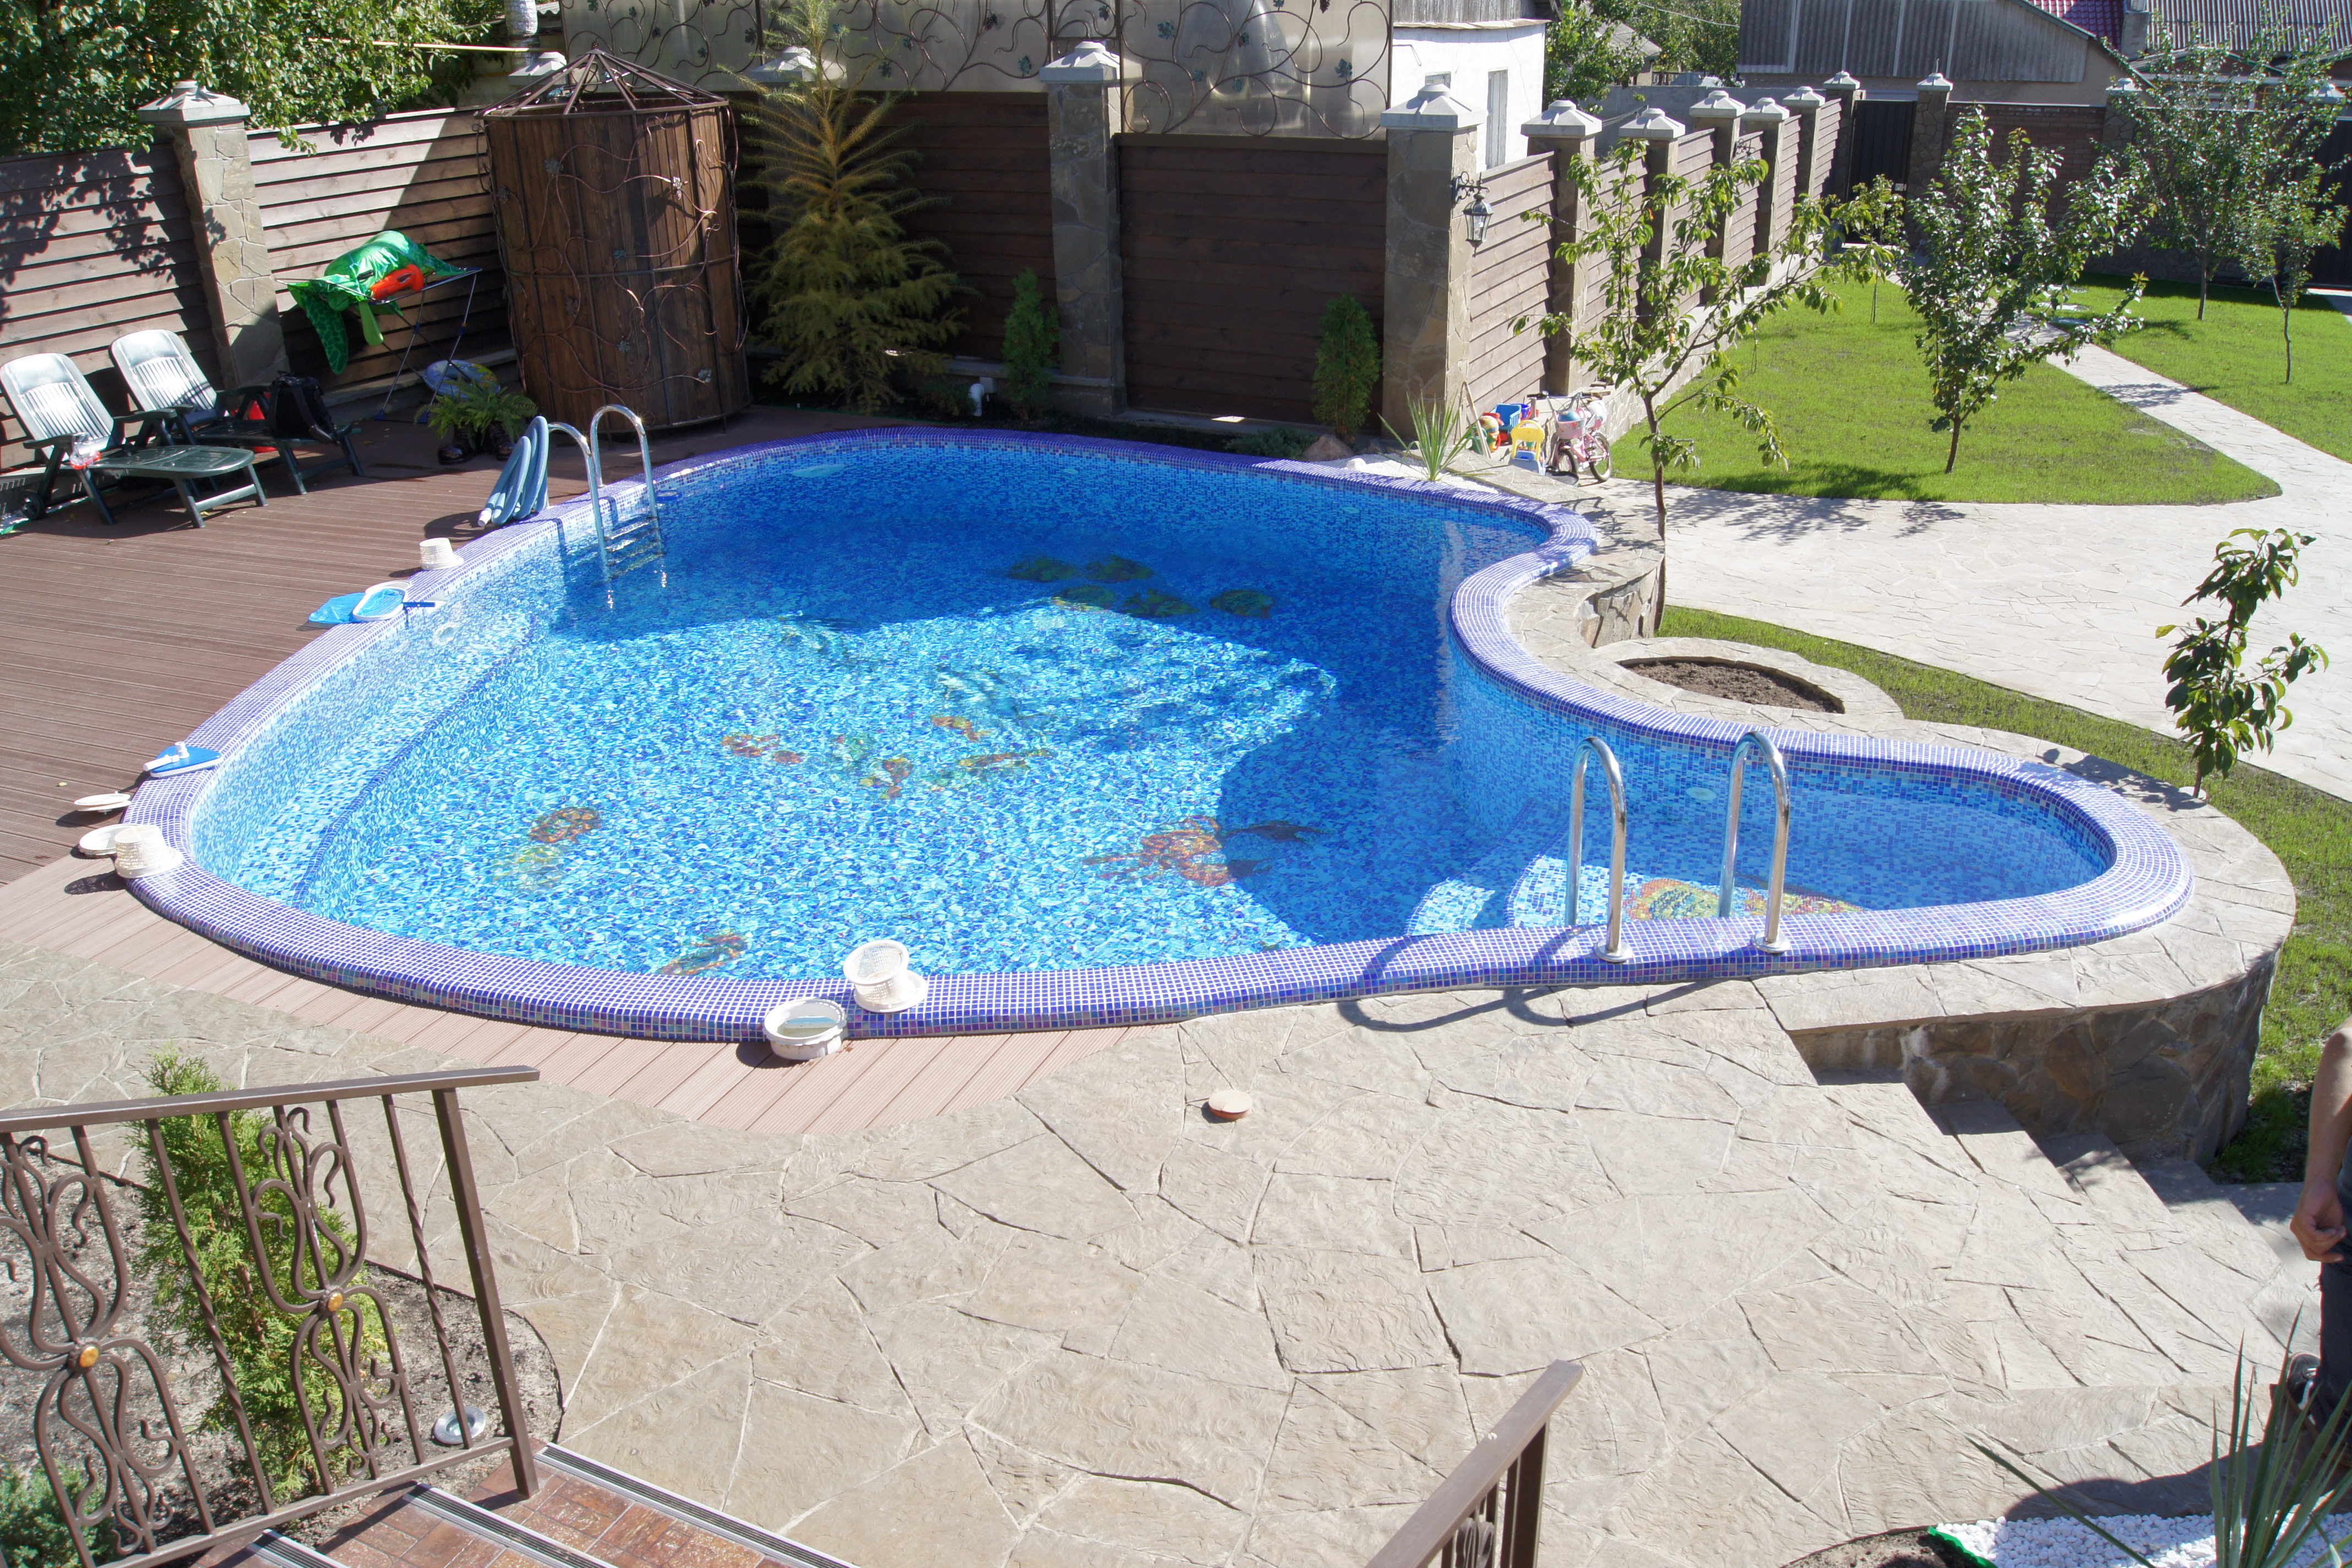 11 tips for building a concrete pool and decorating the walls of the pool in the country